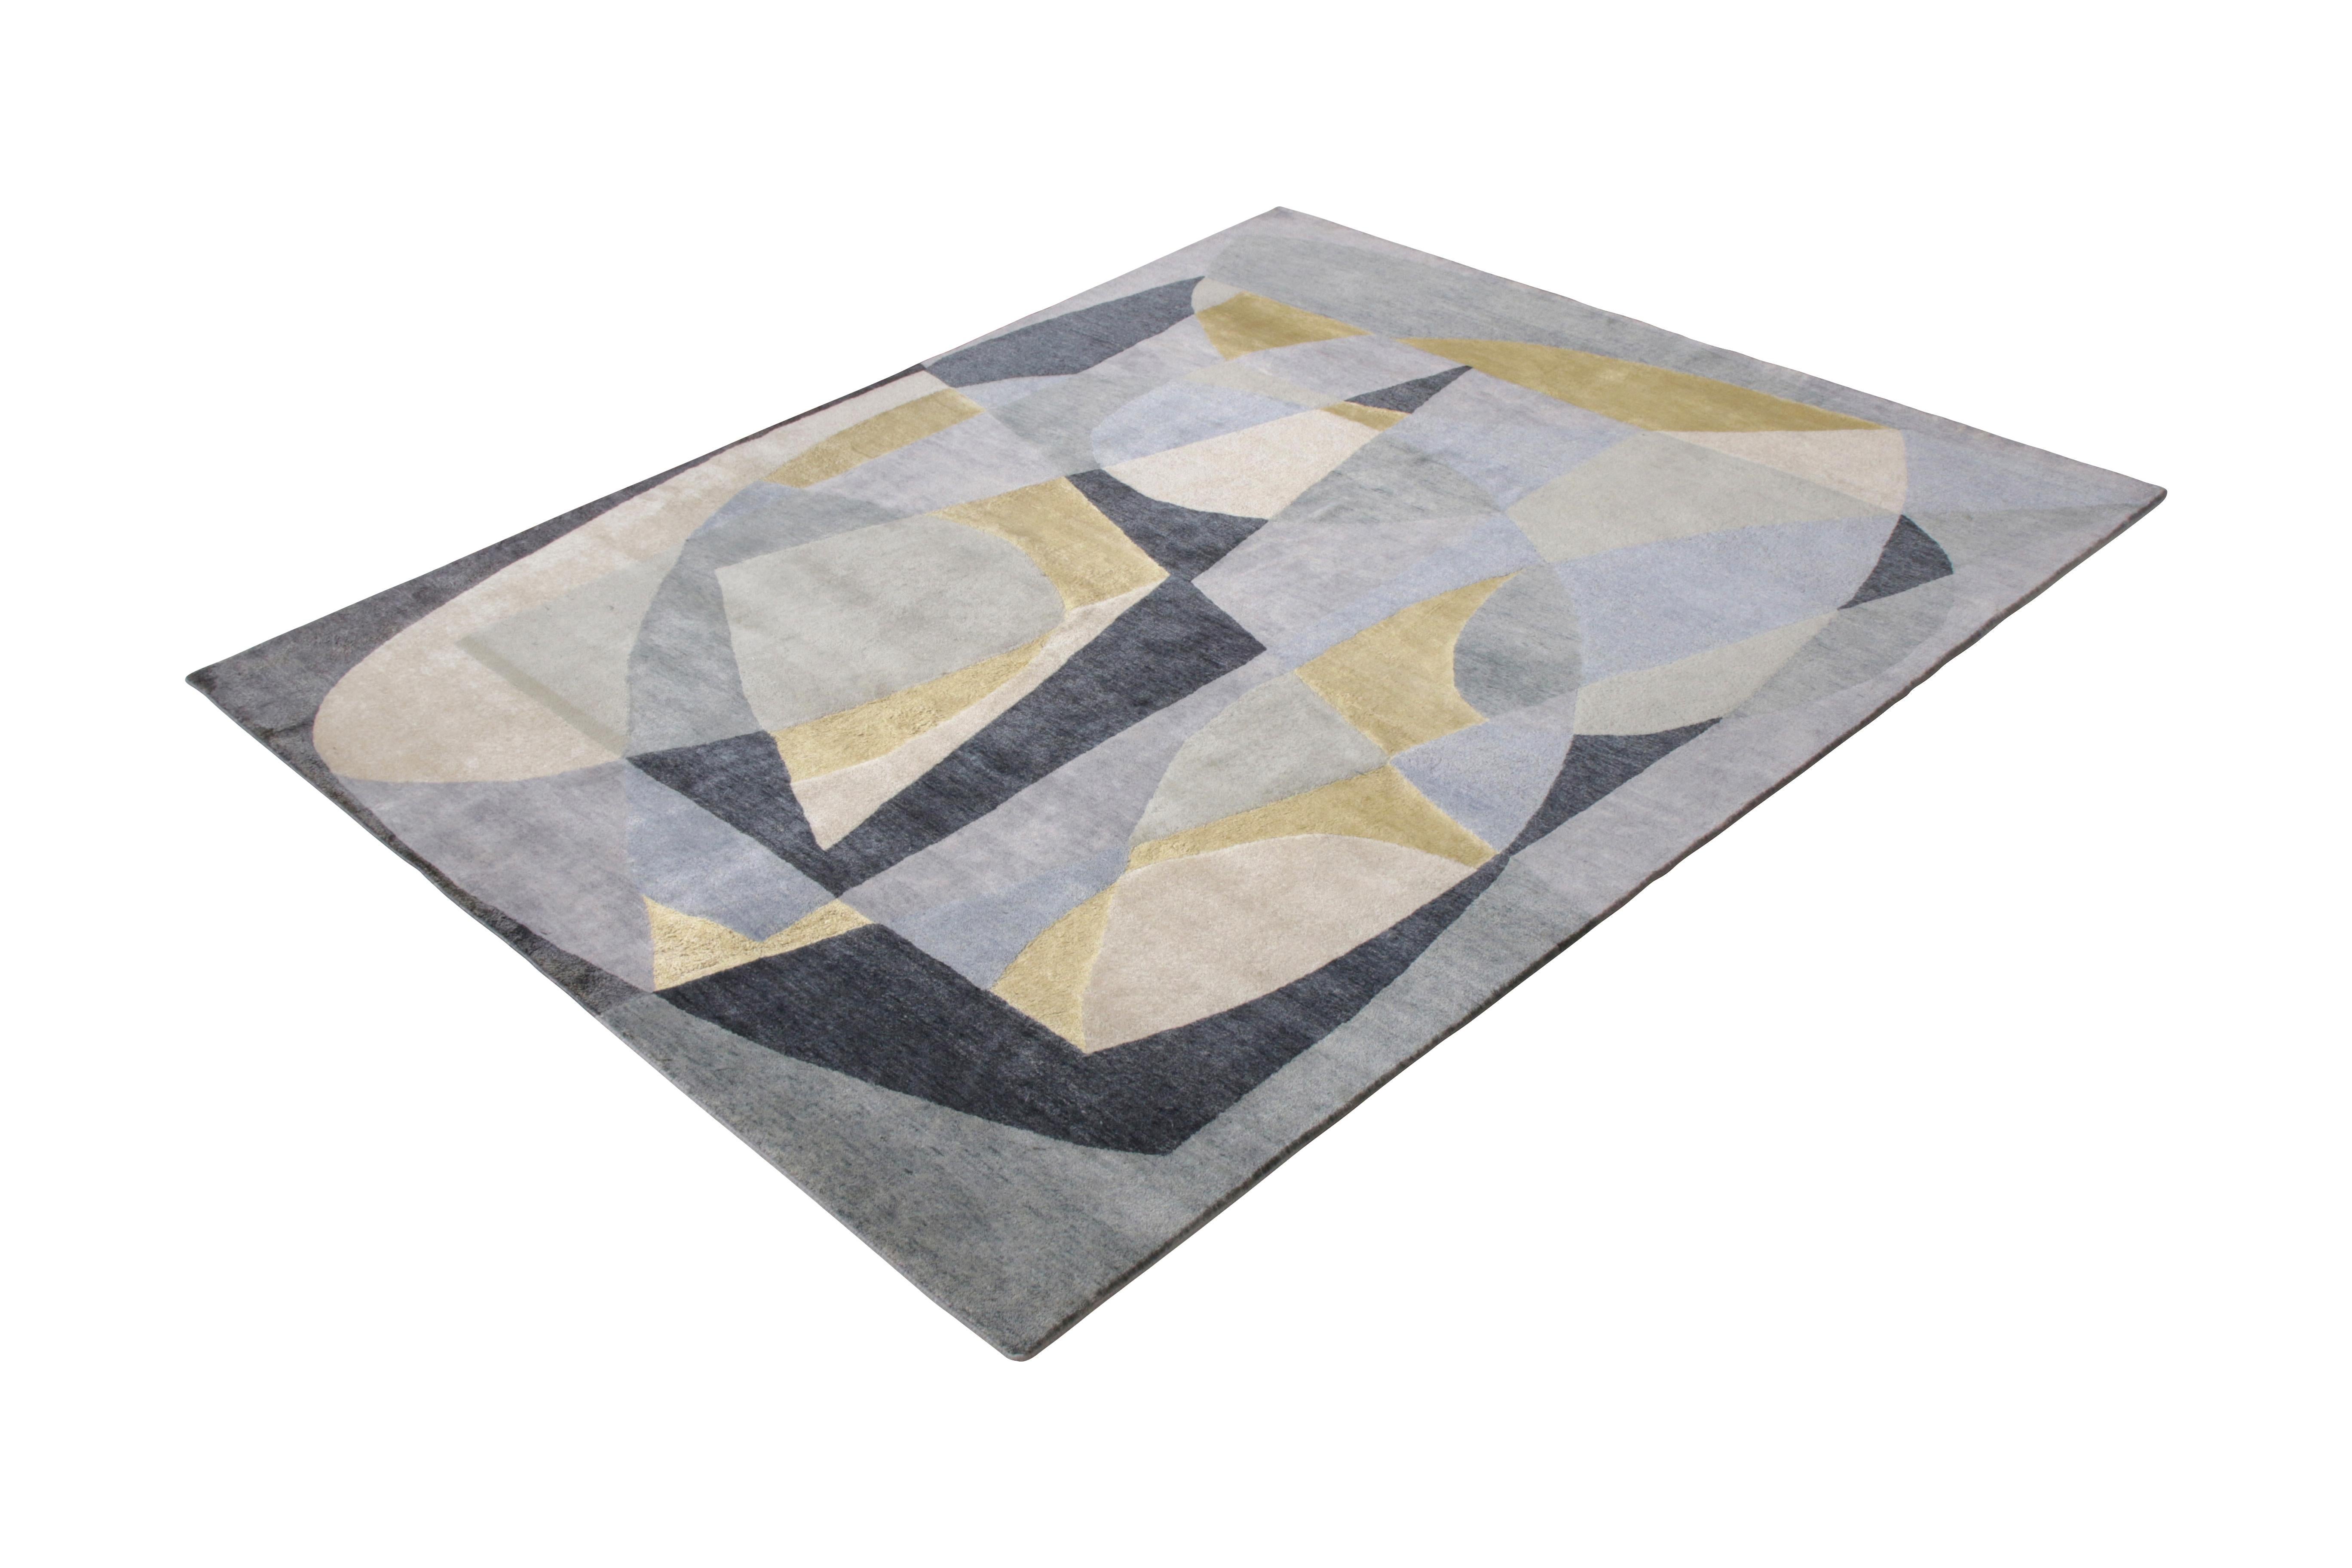 Hand knotted in wool and silk, this custom rug design hails from the Mid-Century Modern rug collection by Rug & Kilim, a bold new line recapturing an underrepresented, iconic period with an entirely new approach to large scale, drawing, varied